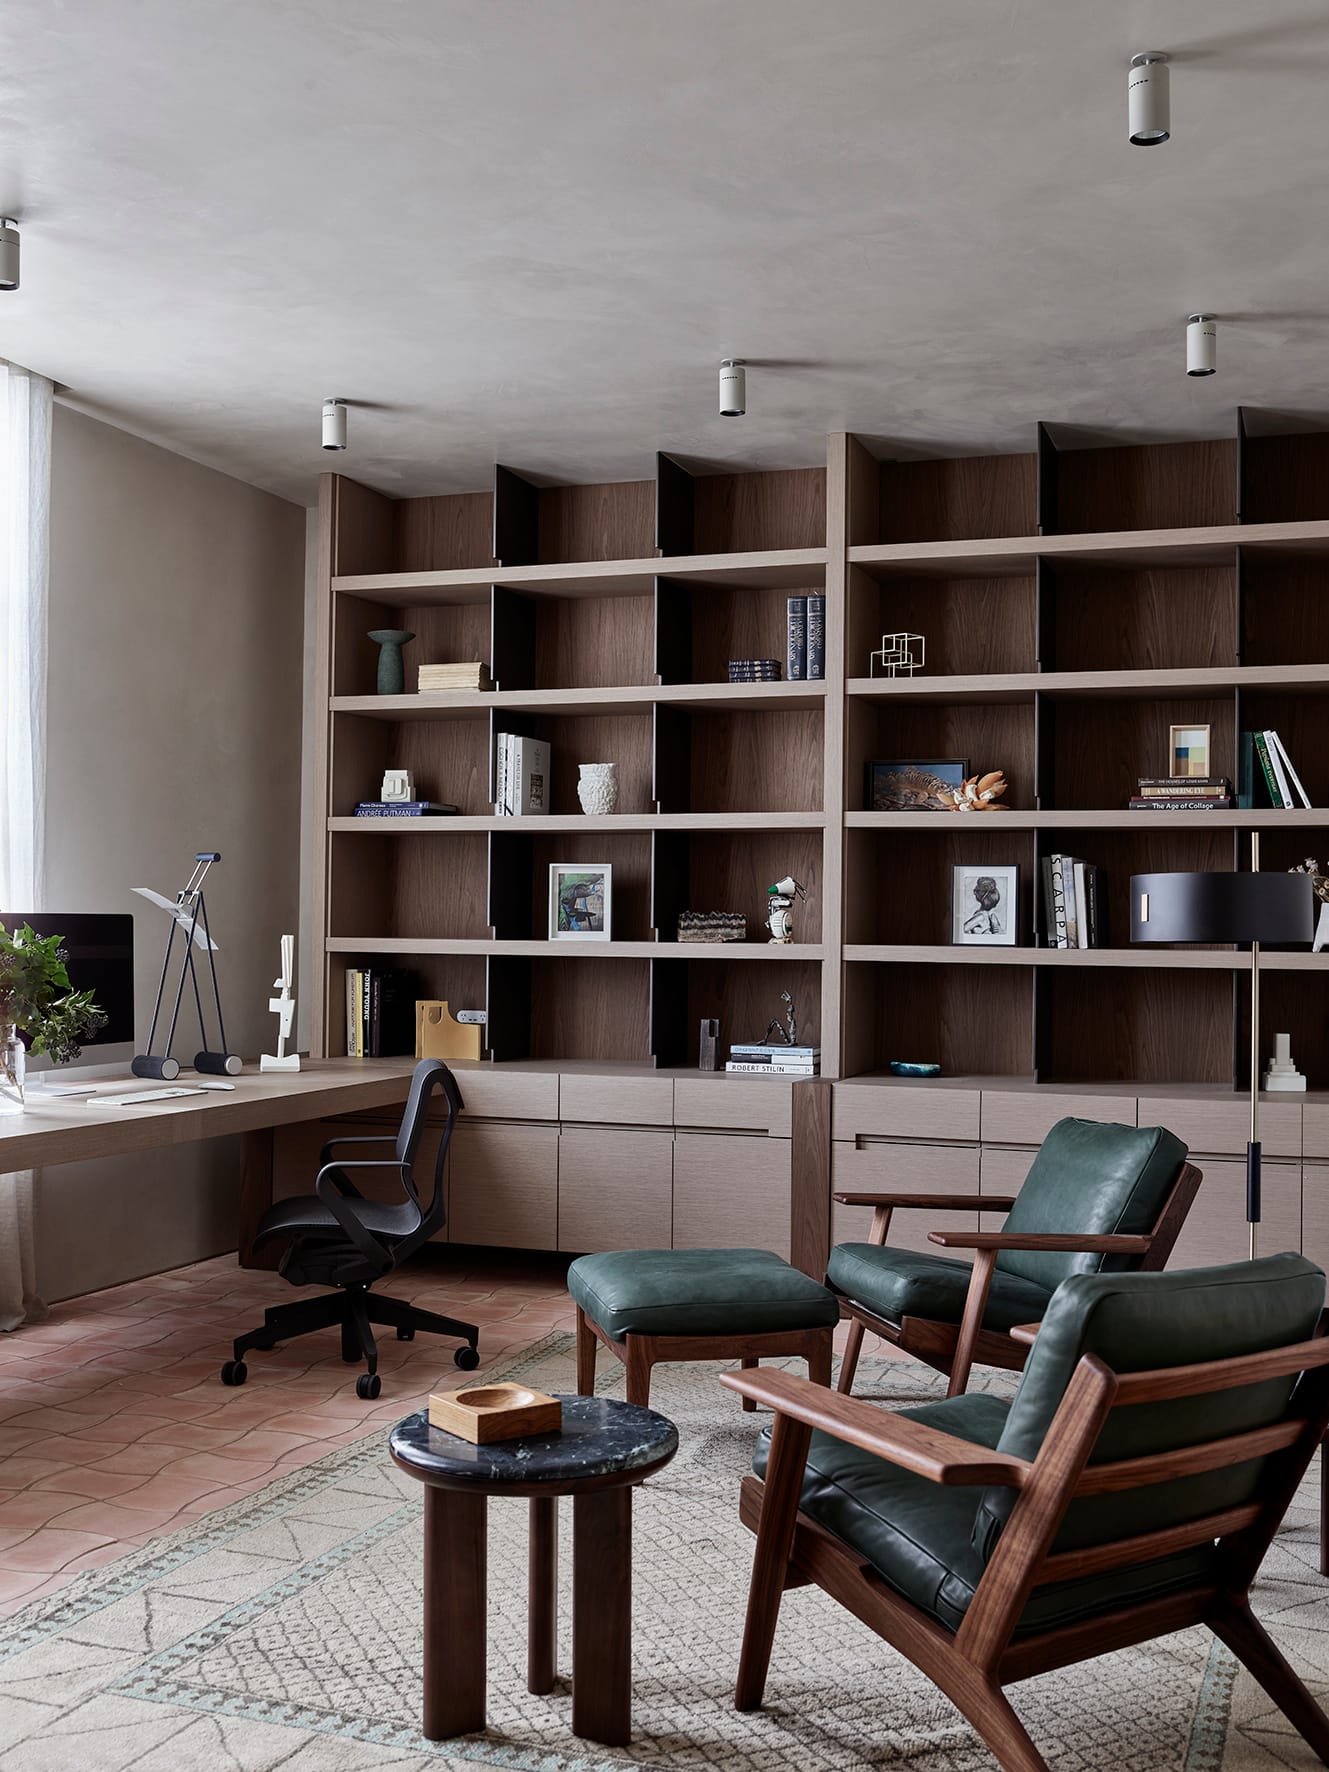 Terra Firma by RobsonRak showing the interior of the modern home office and timber joinery and leather seats